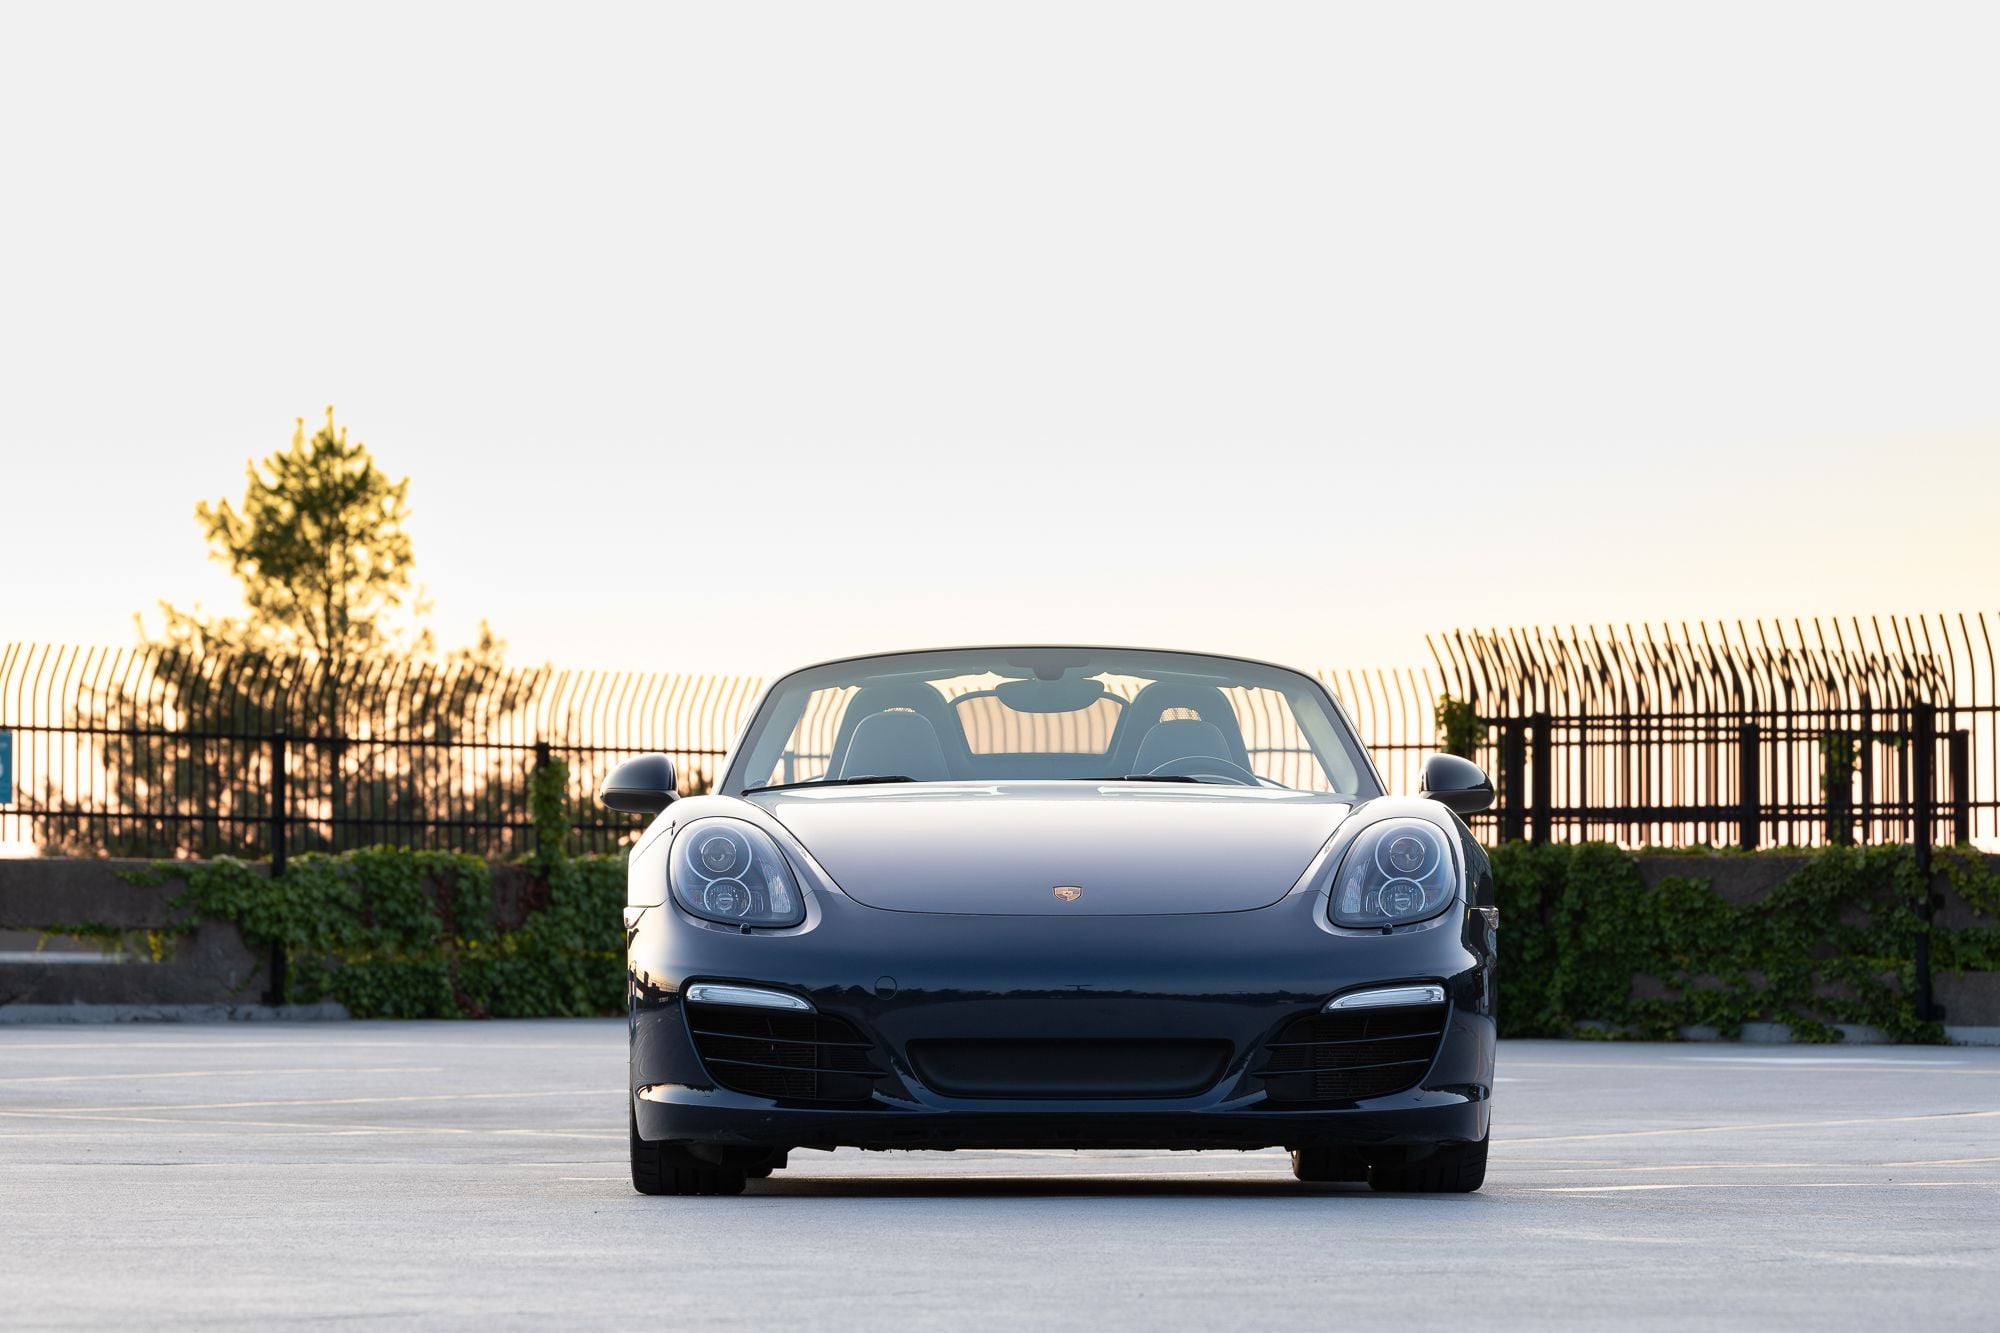 2014 Porsche Boxster - 2014 Boxster S - 42,500 miles, 6sp, GTS Spec + extra wheel set - Used - VIN WP0CB2A88ES141479 - 42,525 Miles - 6 cyl - 2WD - Manual - Convertible - Blue - Beaverton, OR 97005, United States